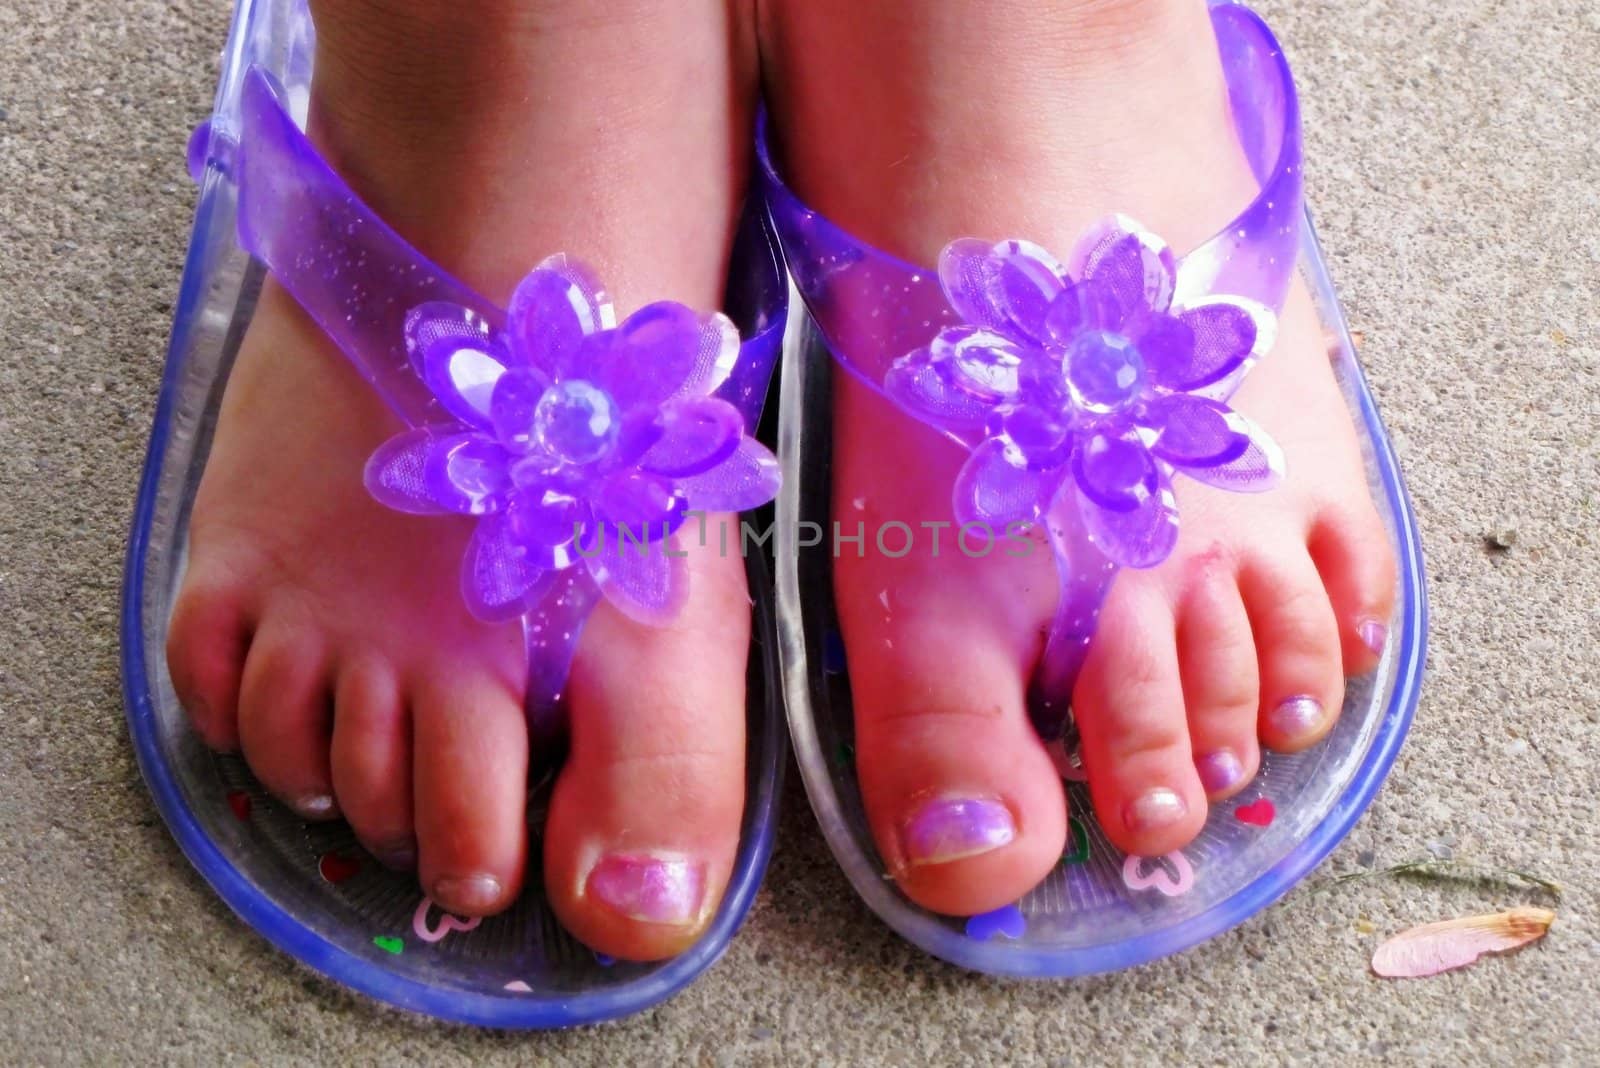 little girl's feet and toes wearing purple sandals